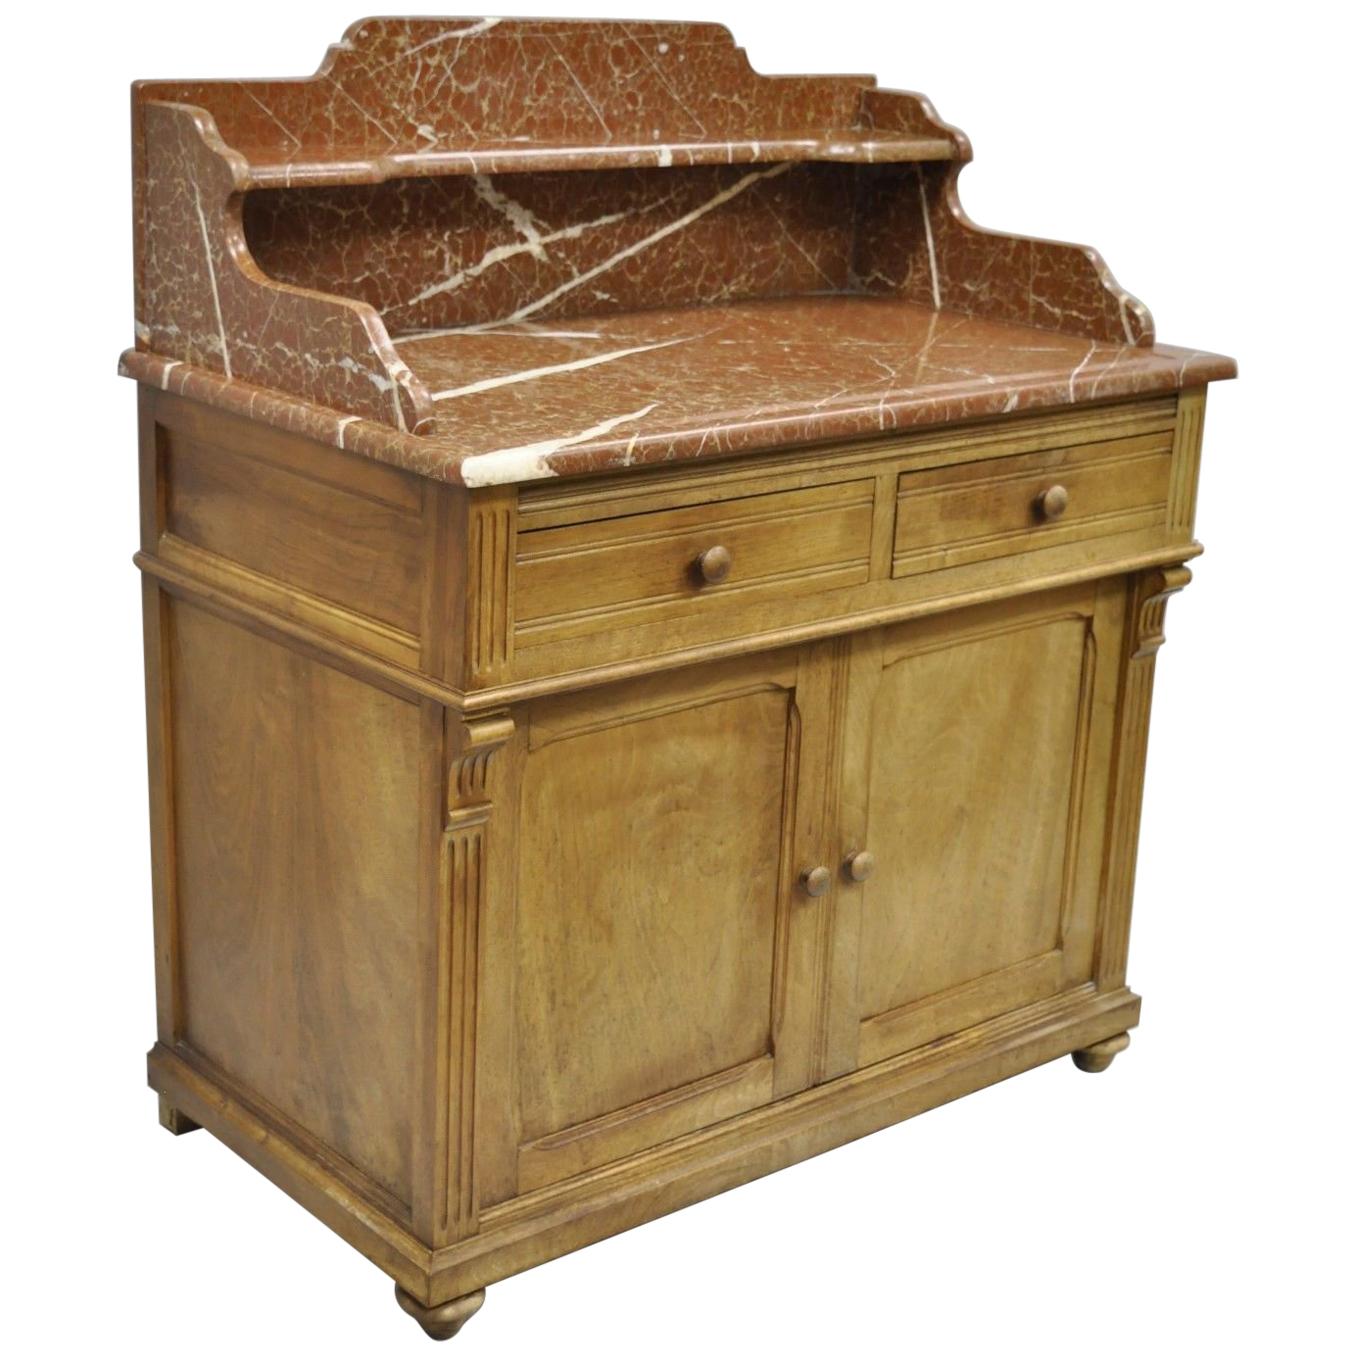 French Victorian Marble-Top Backsplash Wash Stand Bathroom Commode Cabinet Stand